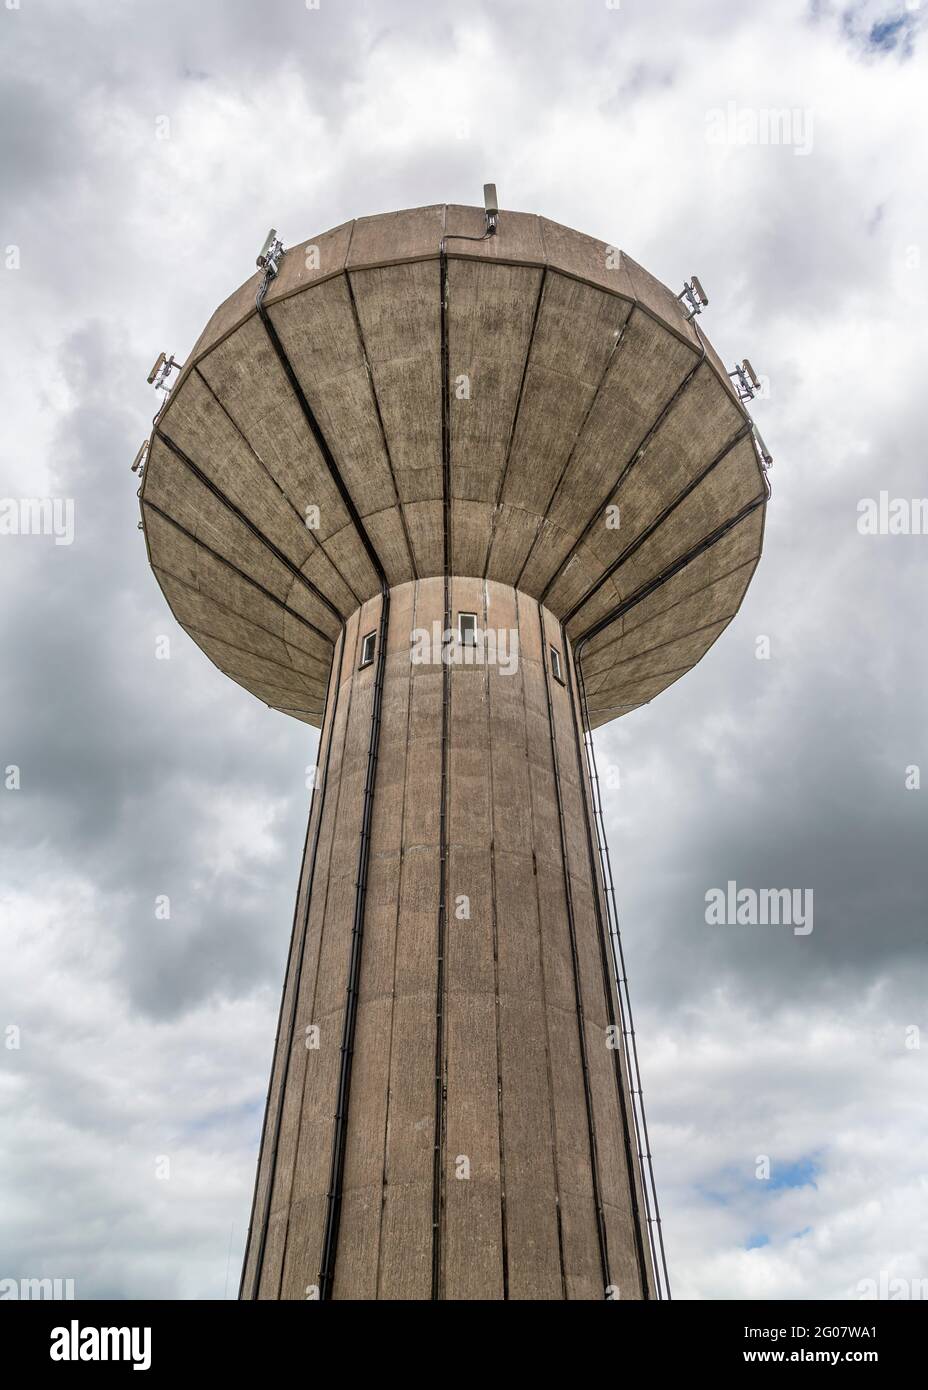 Redditch Water Tower, Headless Cross, Redditch, Worcestershire. Banque D'Images